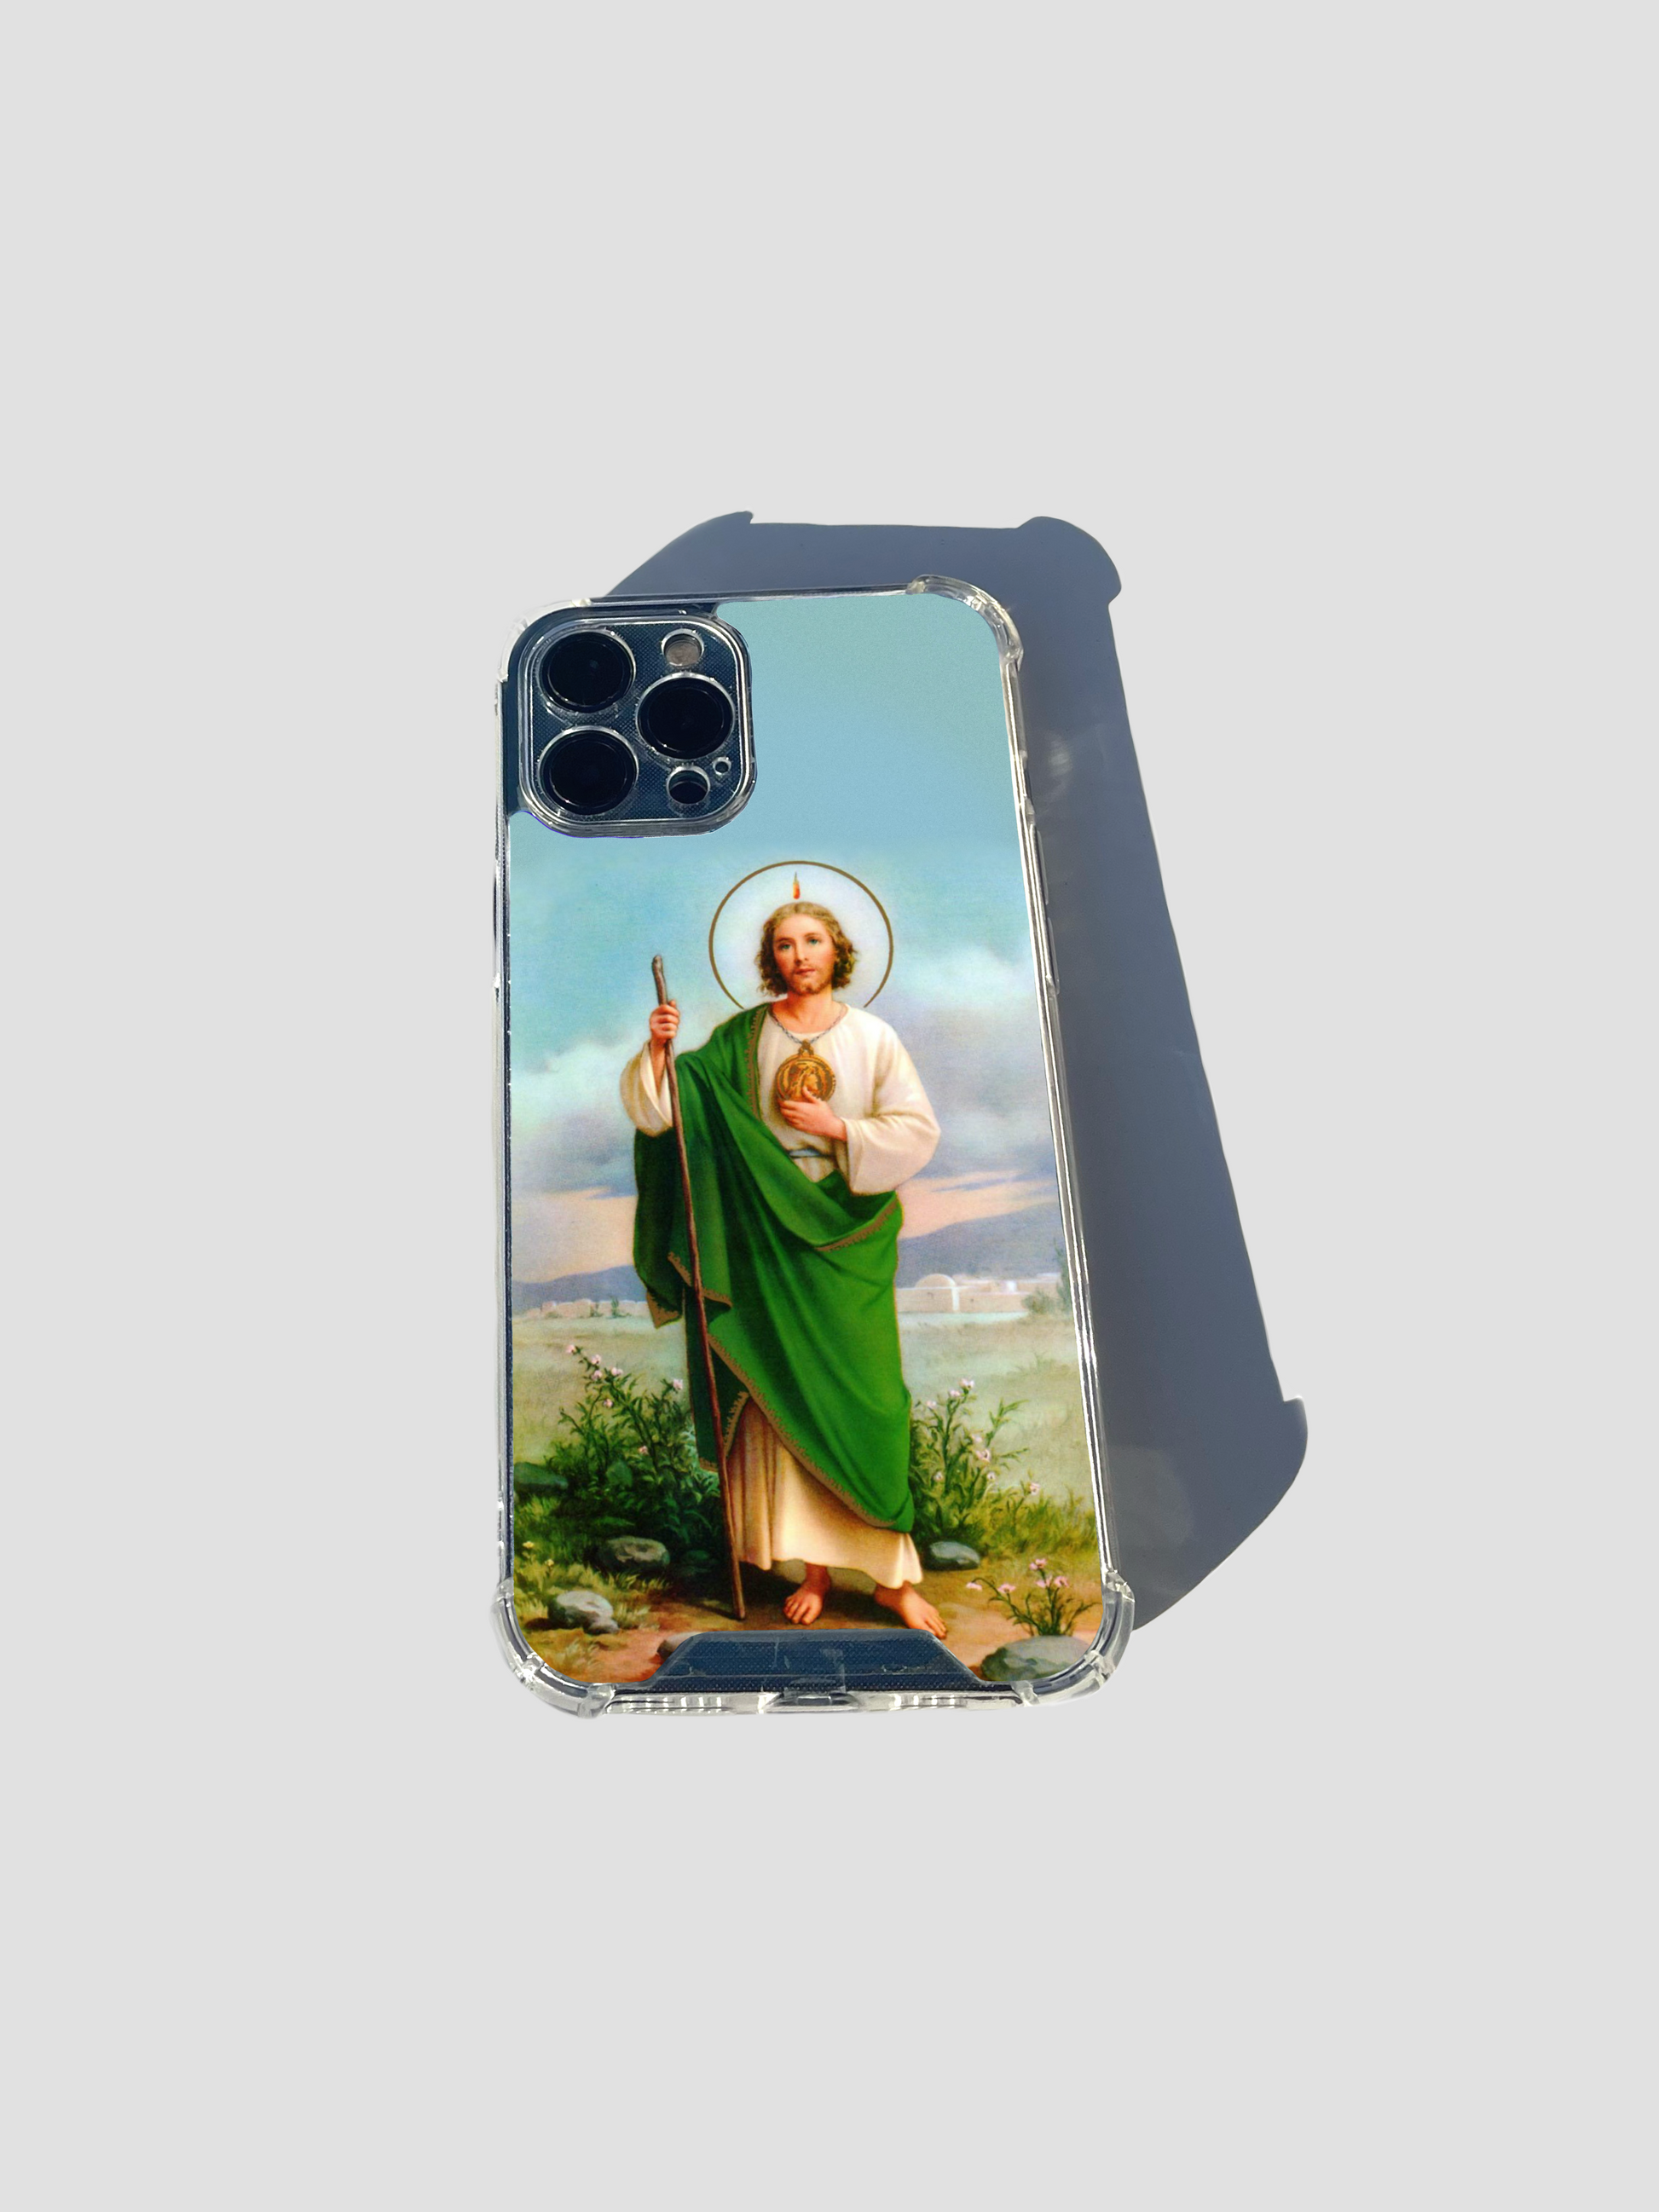 Our Lady of Guadalupe and San Judas Tadeo iPhone Case iPhone 11, iPhone  iPhone 12 Mini, iPhone 12, iPhone 12 Pro, iPhone 13 Mini, iPhone 13 